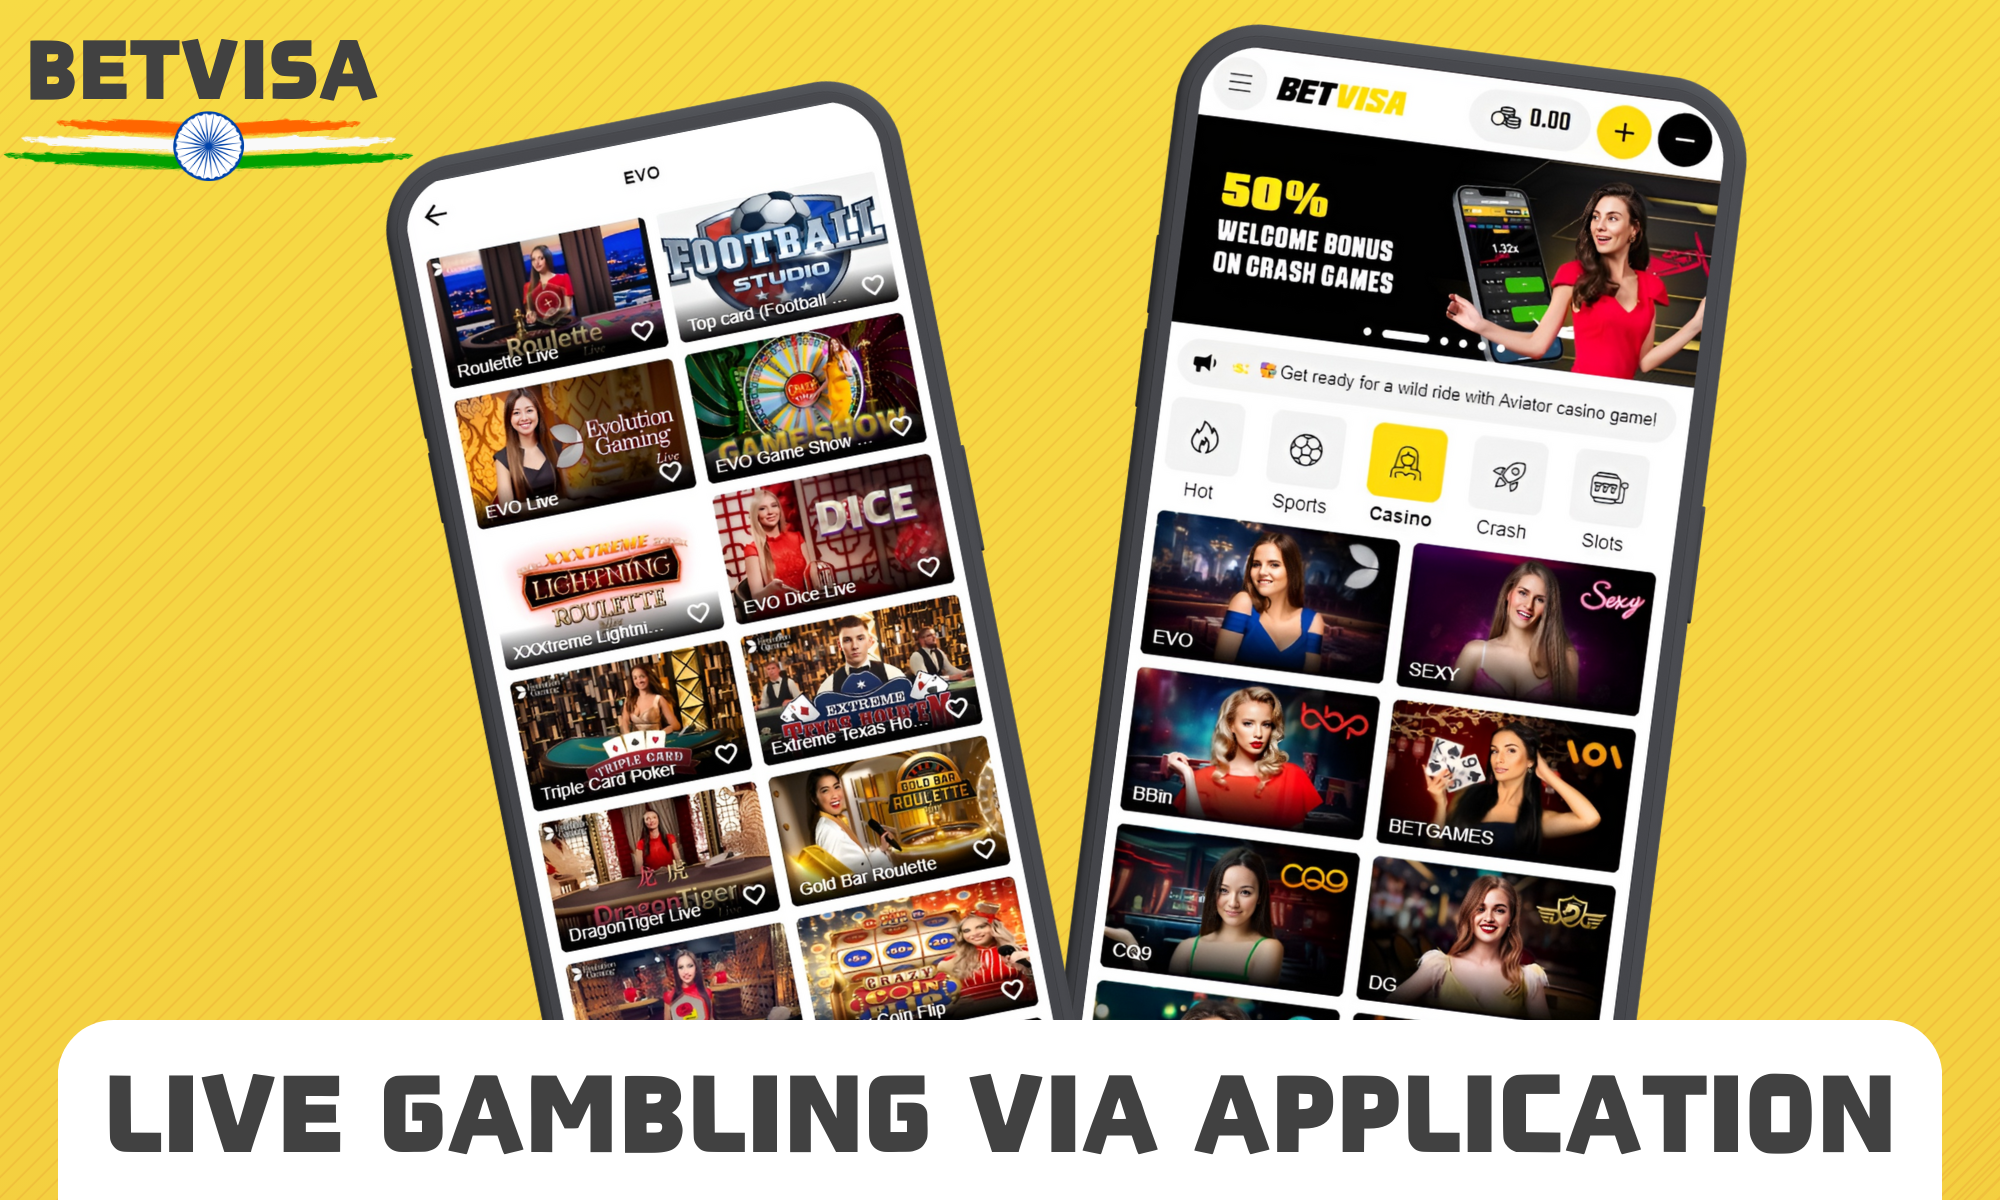 Betvisa offers the opportunity to play online games through a mobile application